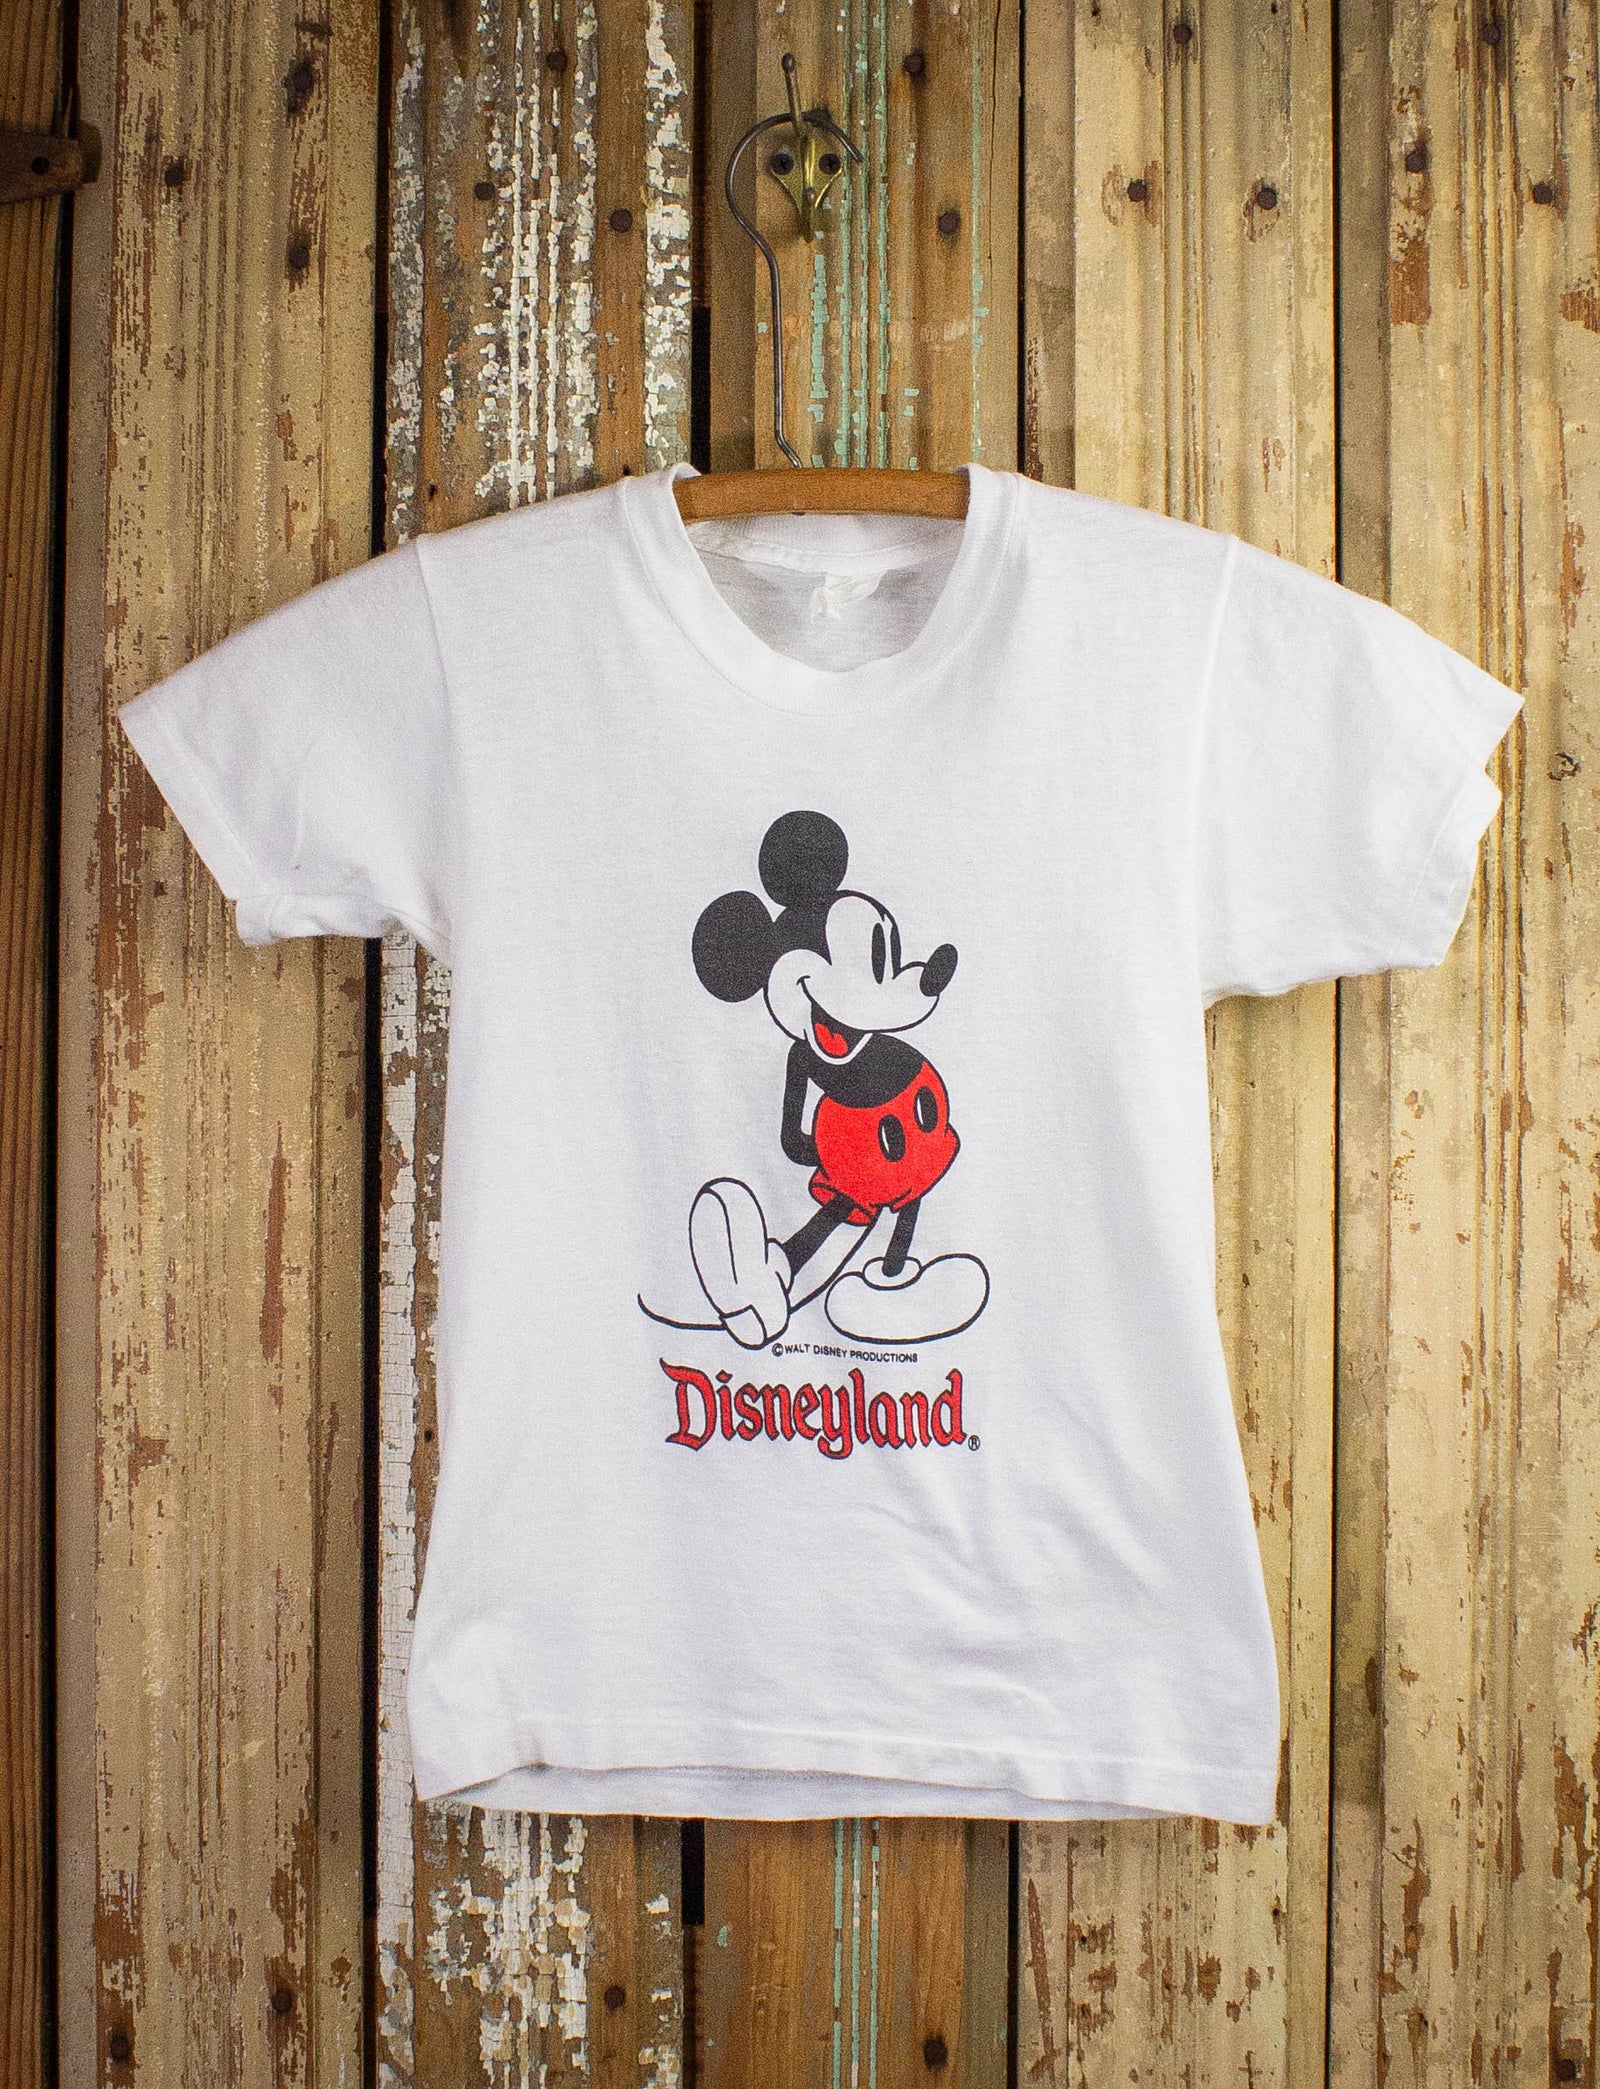 Vintage Mickey Mouse Disneyland Graphic T Shirt White XS